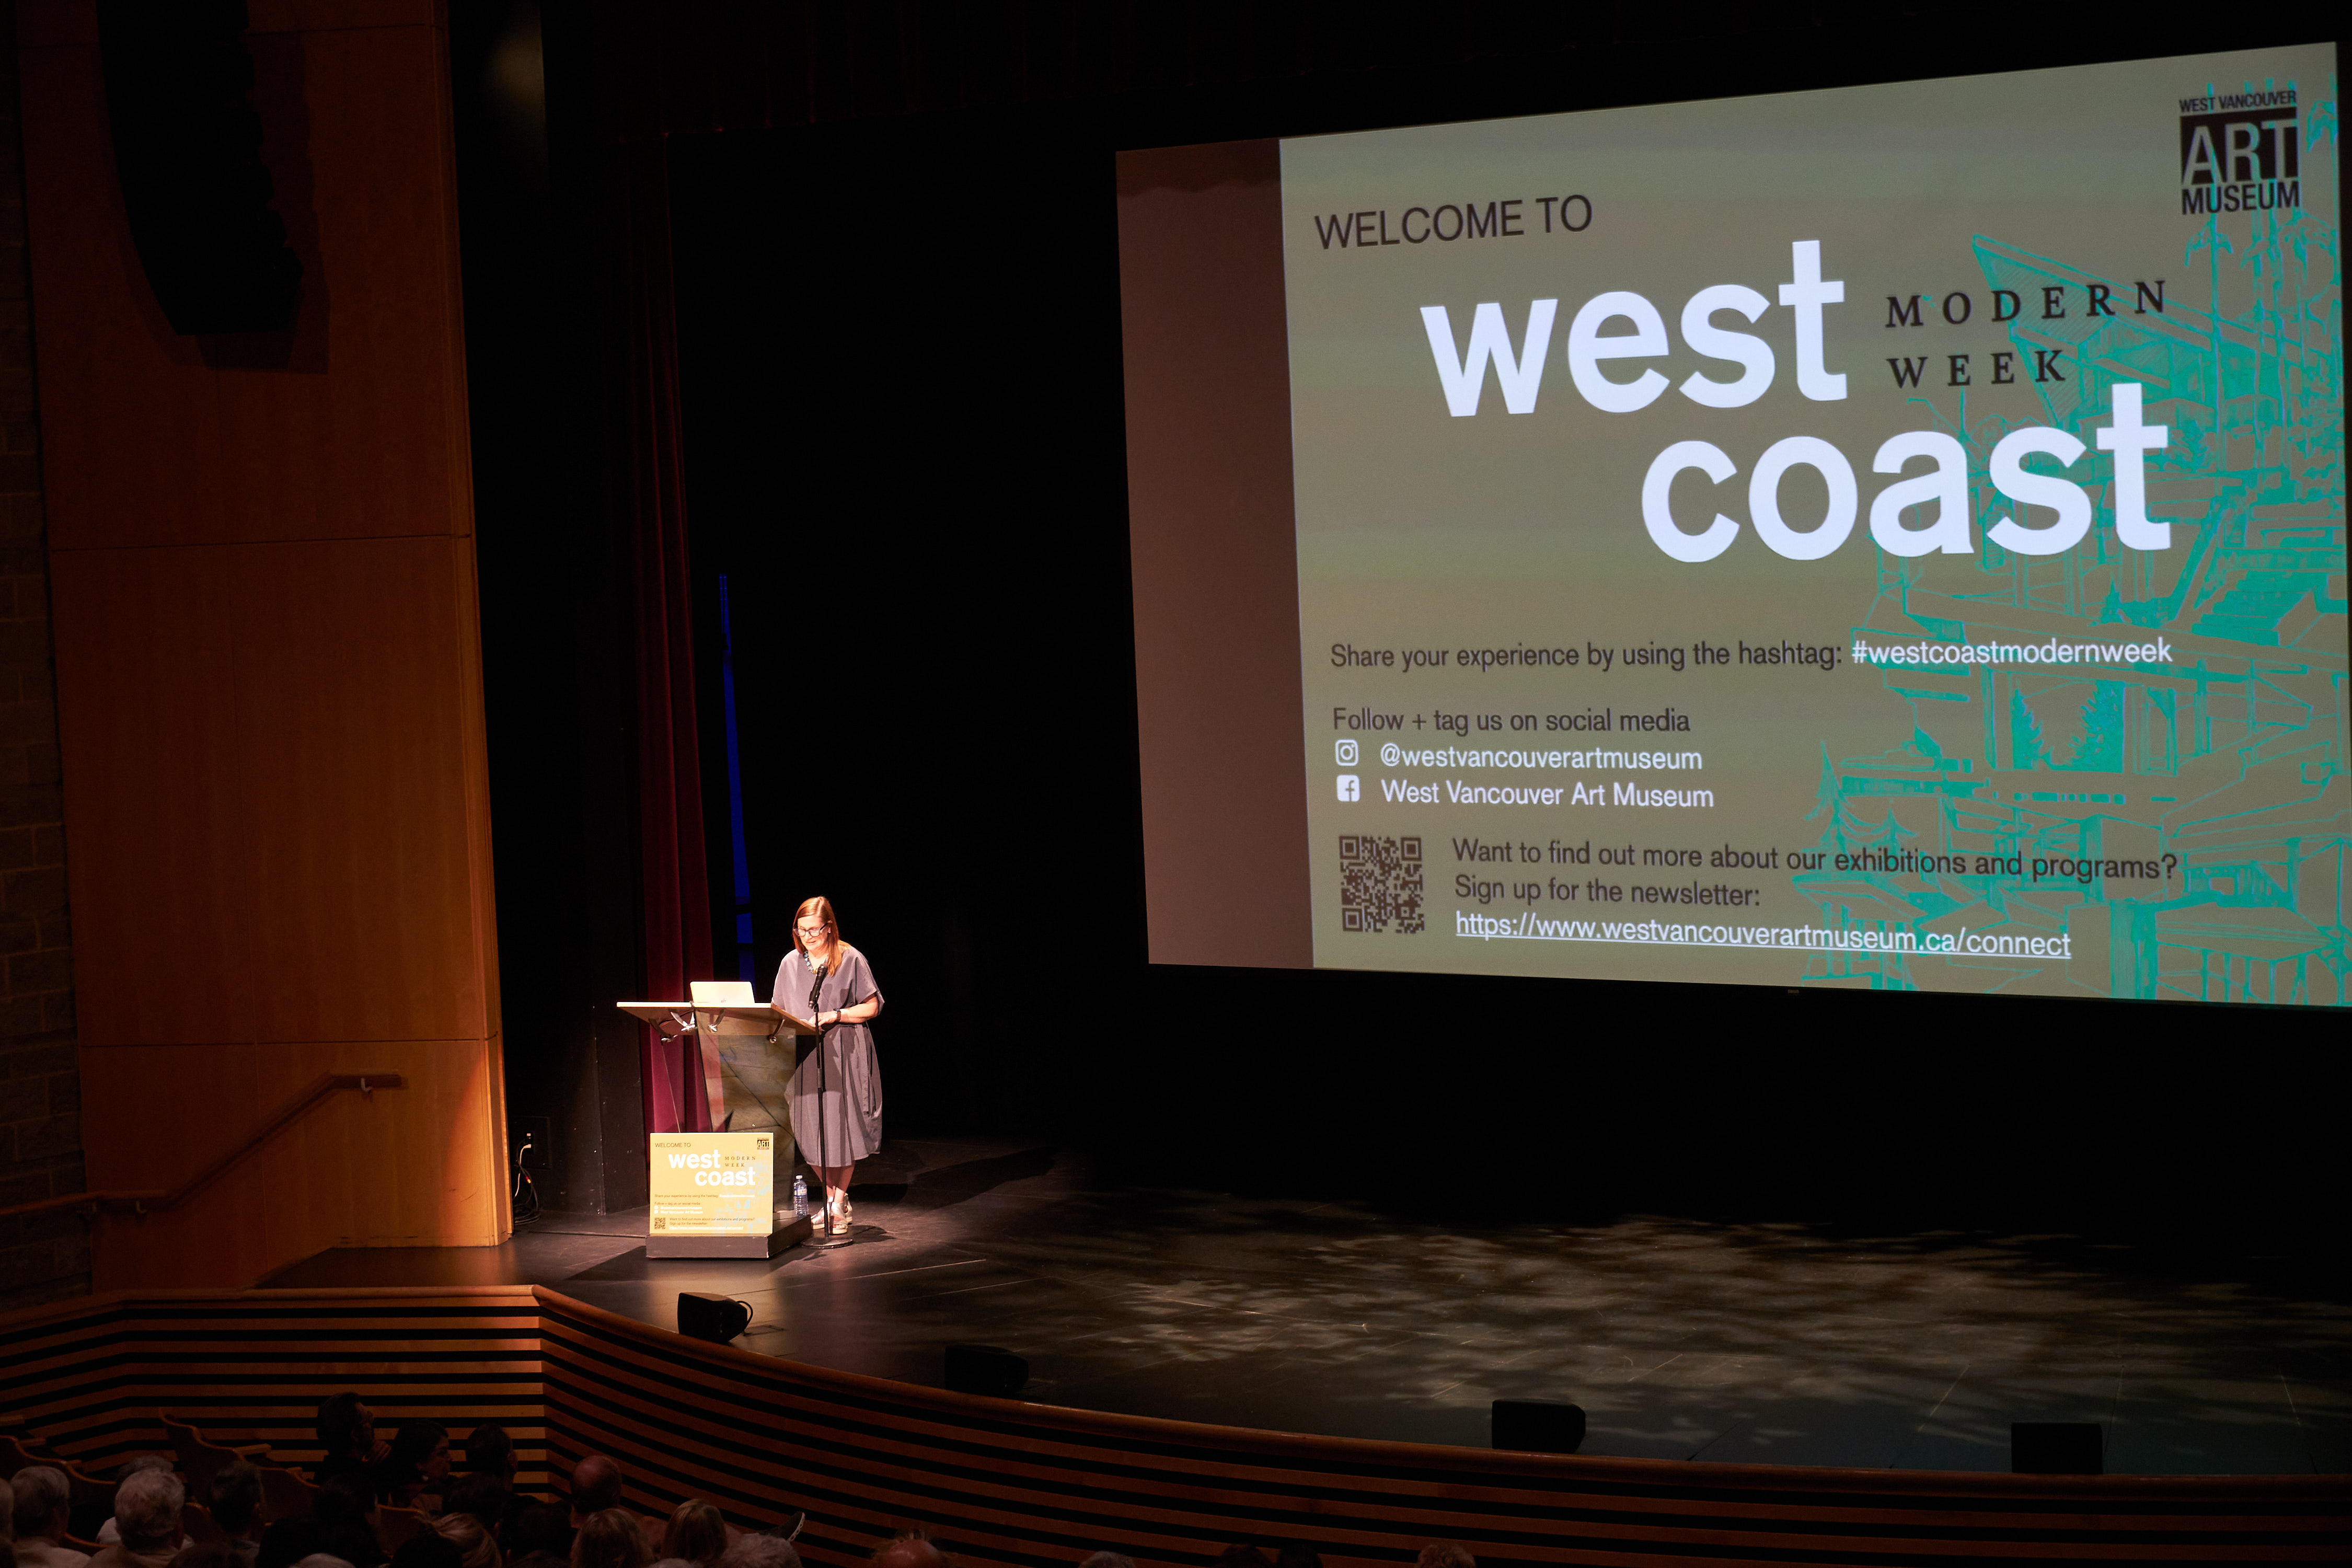 A woman on stage in a large theatre giving a presentation. On the screen behind her is a slide that says "Welcome to West Coast Modern Week" with details about where to find more information on social media and the art museum website.